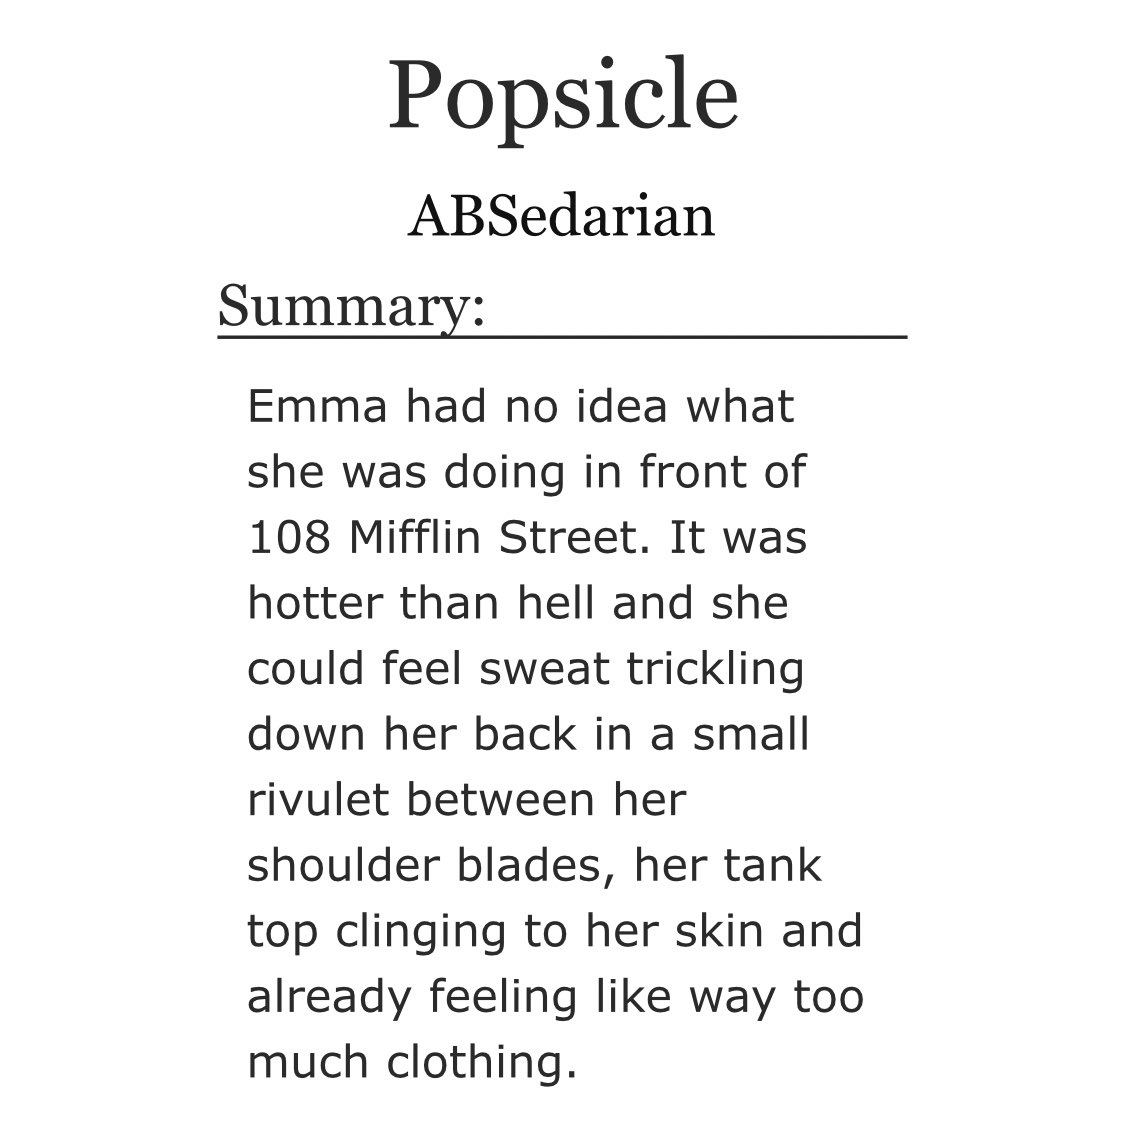 April 5: Popsicle by ABSedarian  https://archiveofourown.org/works/1039477 